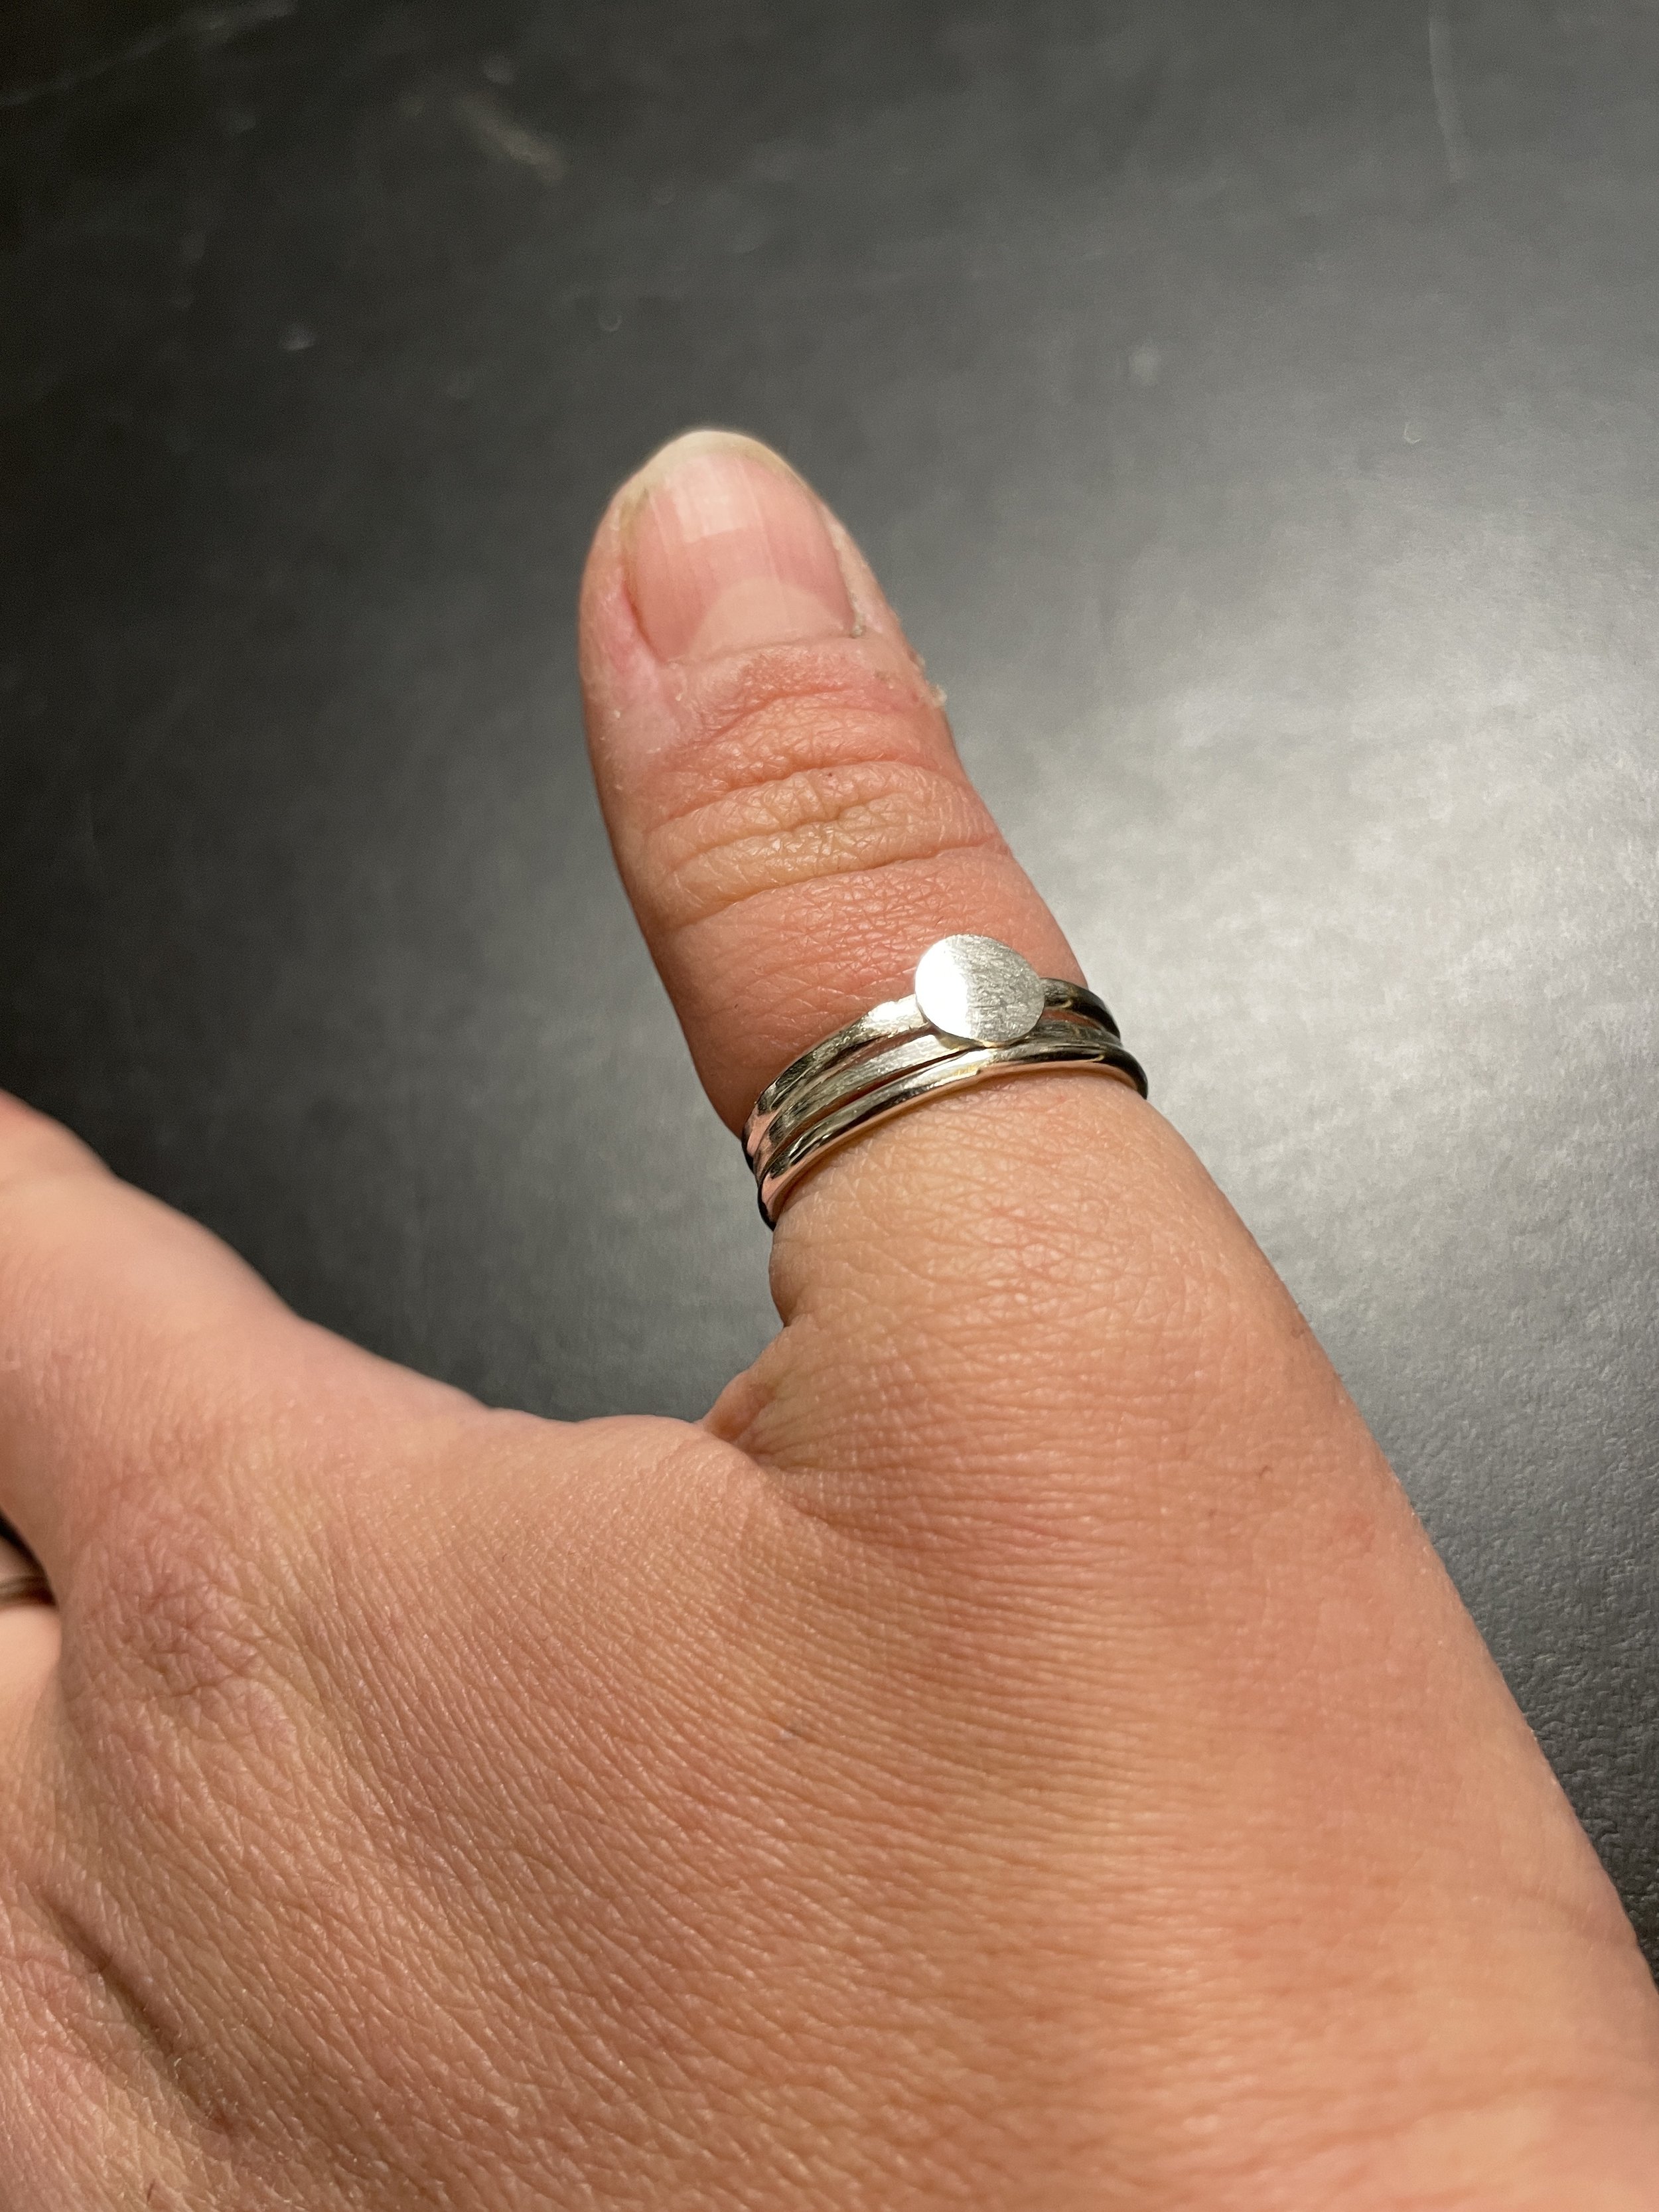 Introduction to Metalsmithing Make Your Own Custom Jewelry - Stacking Rings  Tickets, Multiple Dates